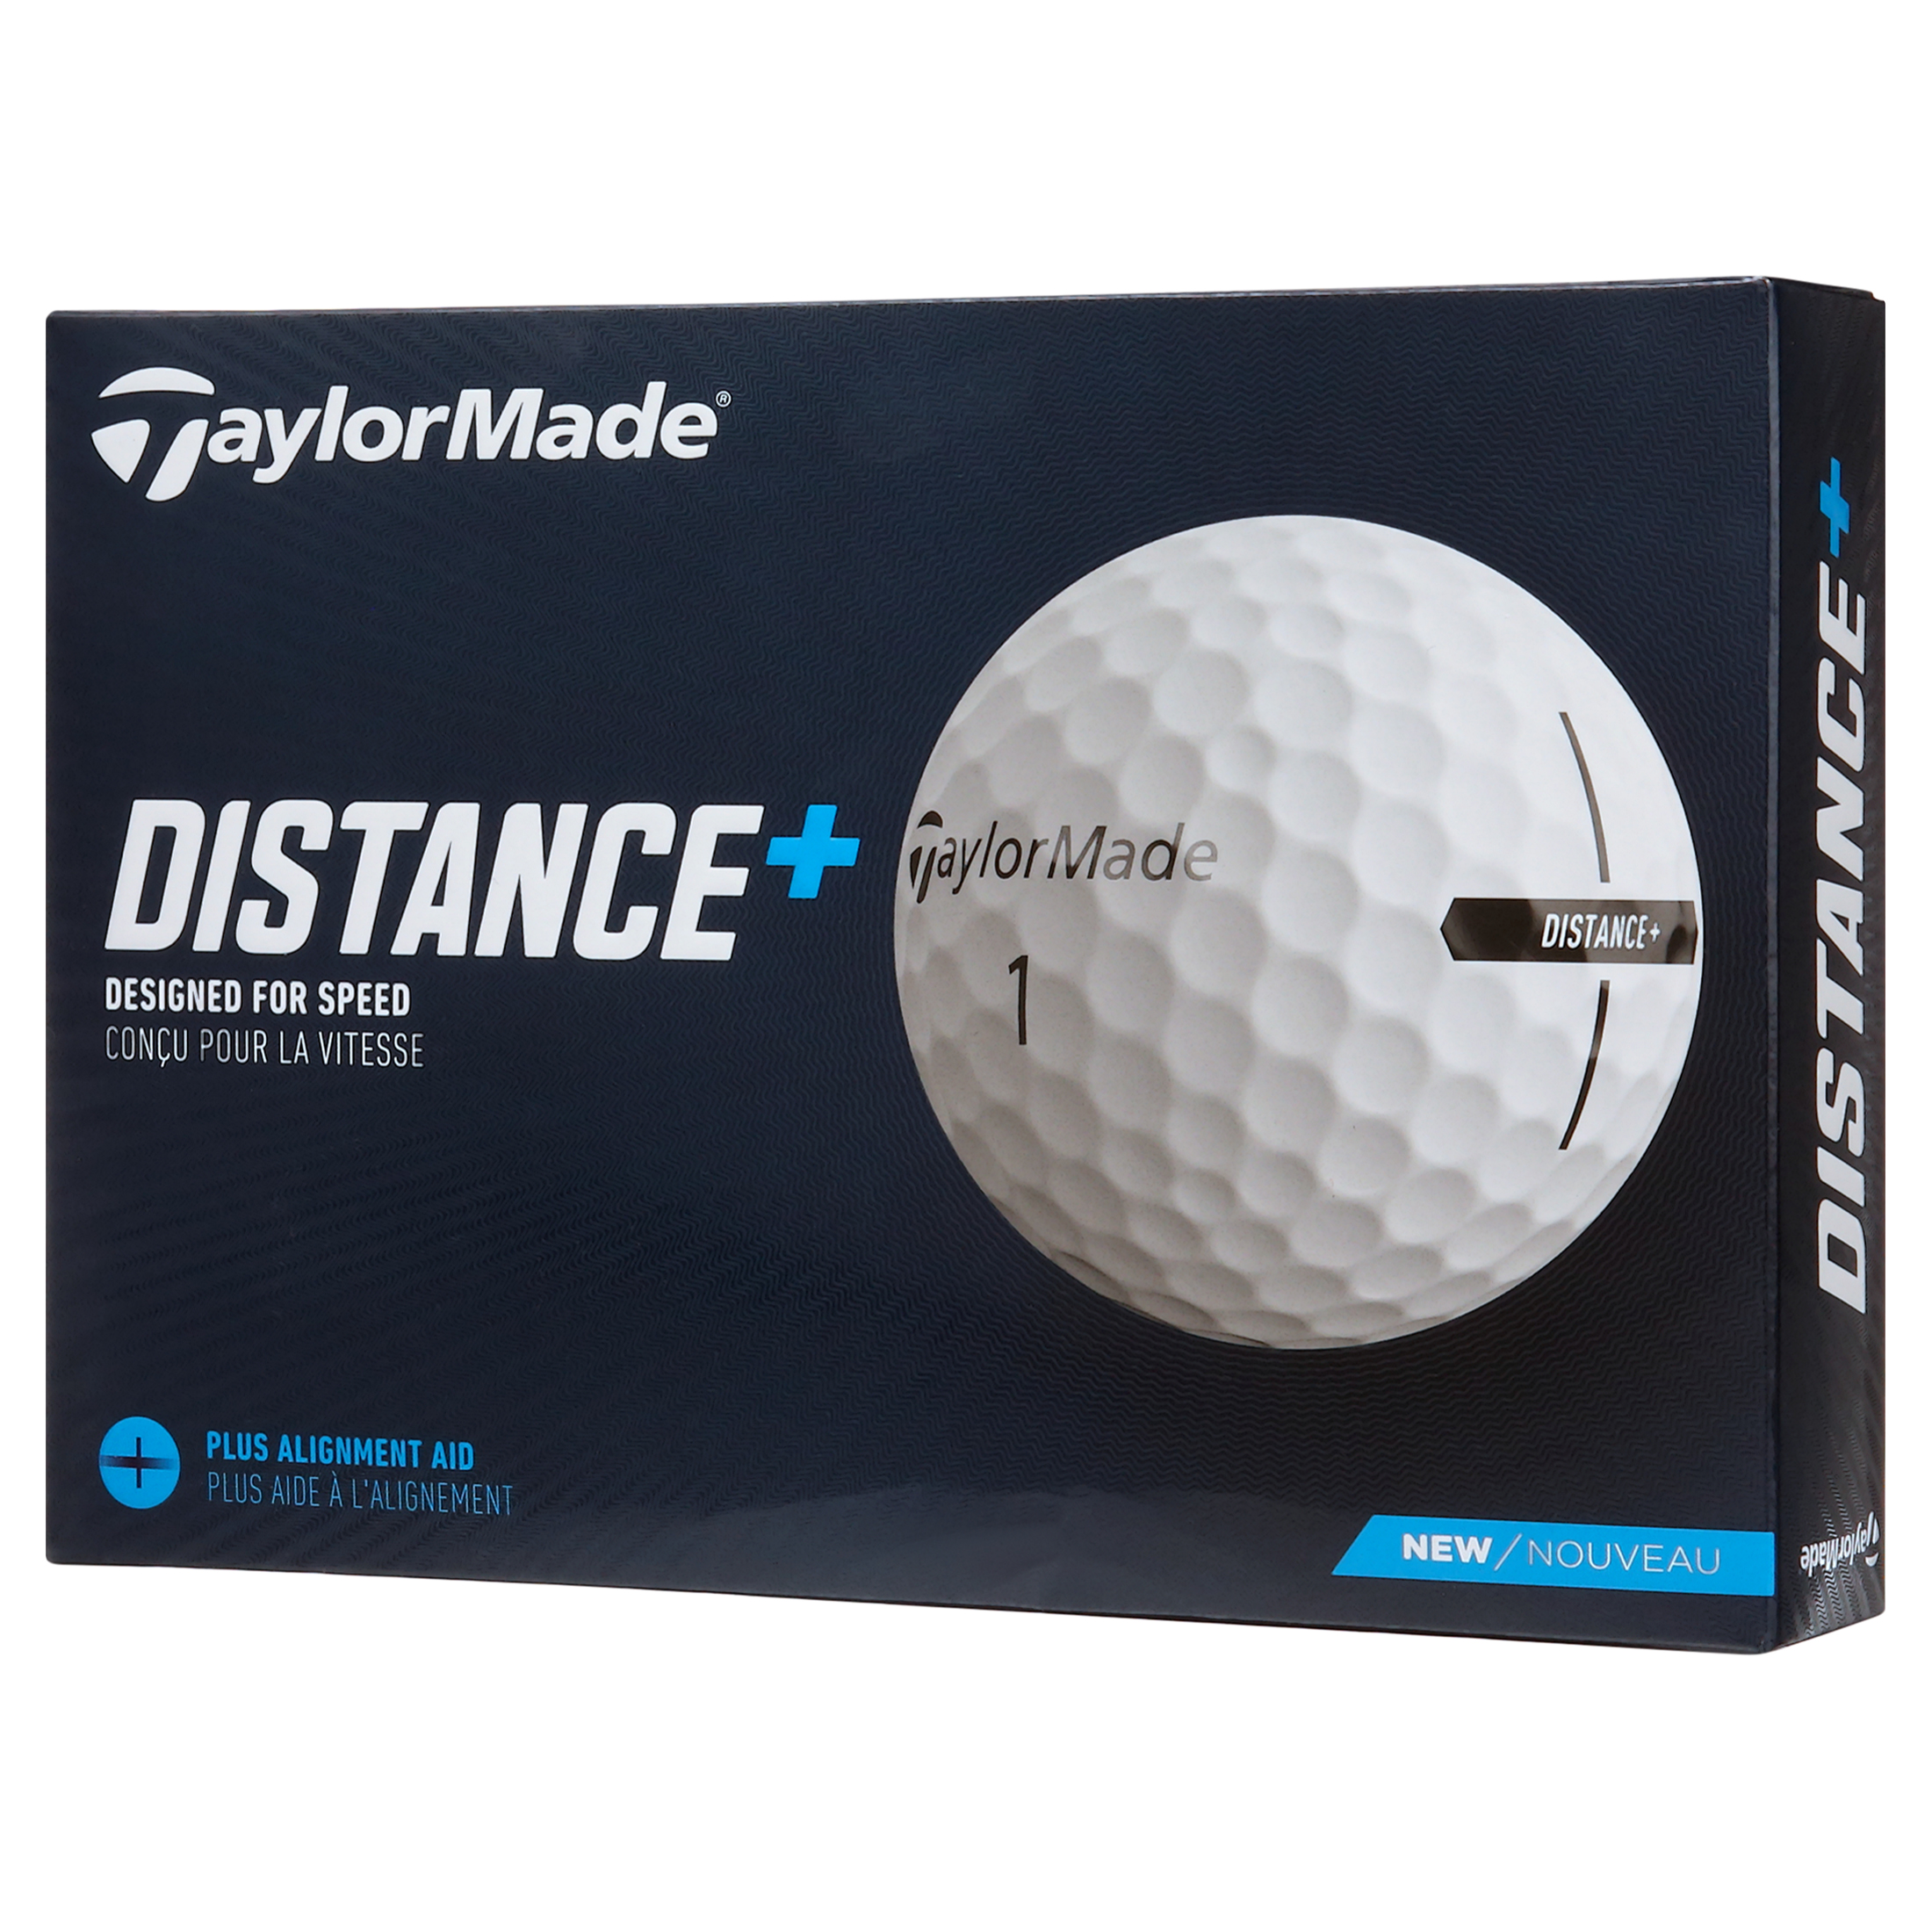 TaylorMade 2021 Distance Plus Golf Balls, 12 Pack, White - image 5 of 6